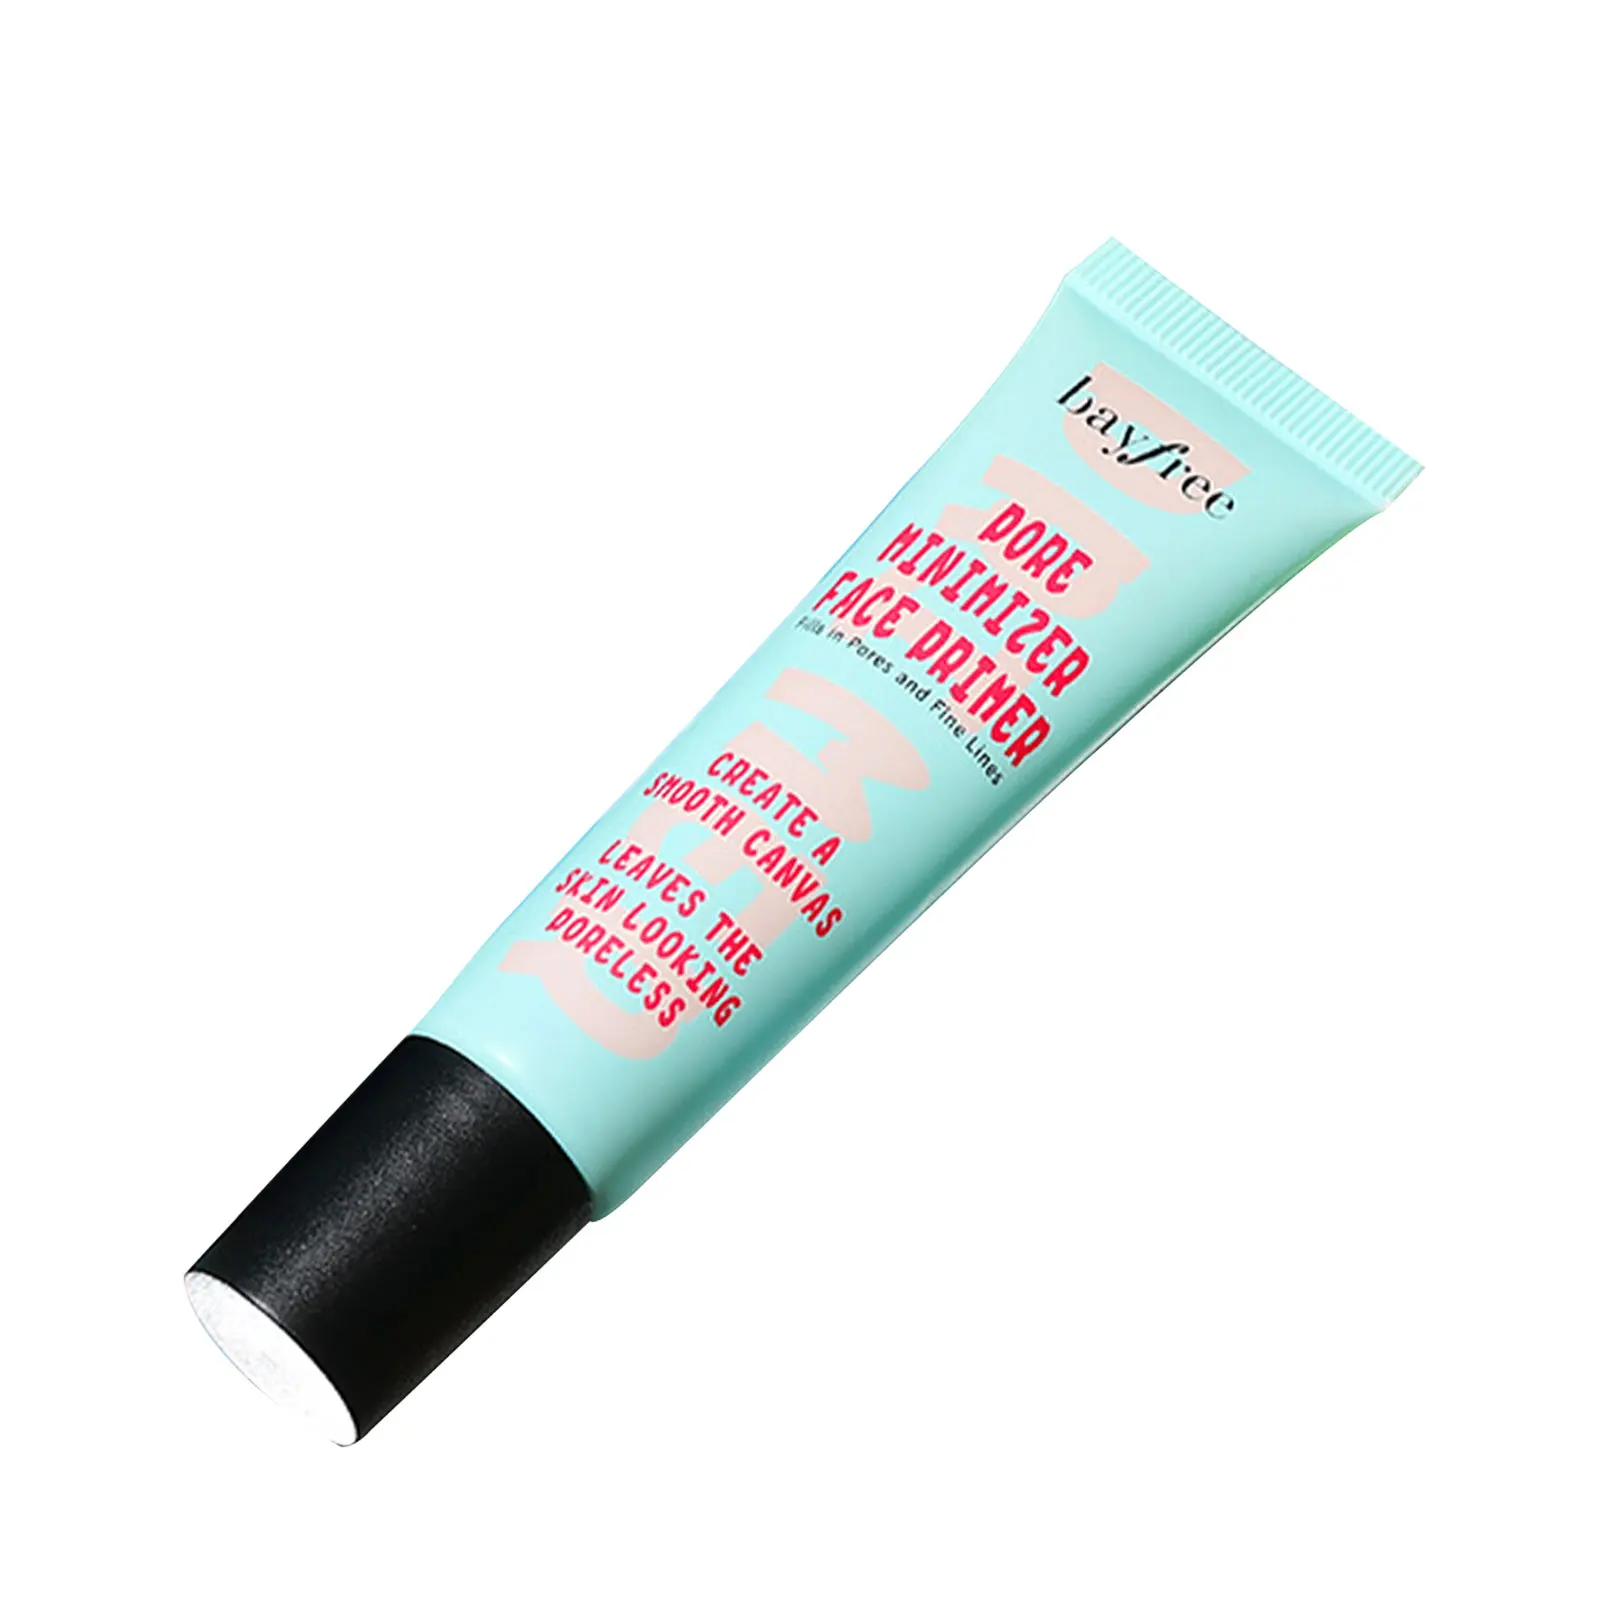 

Makeup Primer Primer 15ml Face Primer 15ml Hydrating Face Primer Lightweight Long Lasting Hydrates Smooths Fills In Pores And